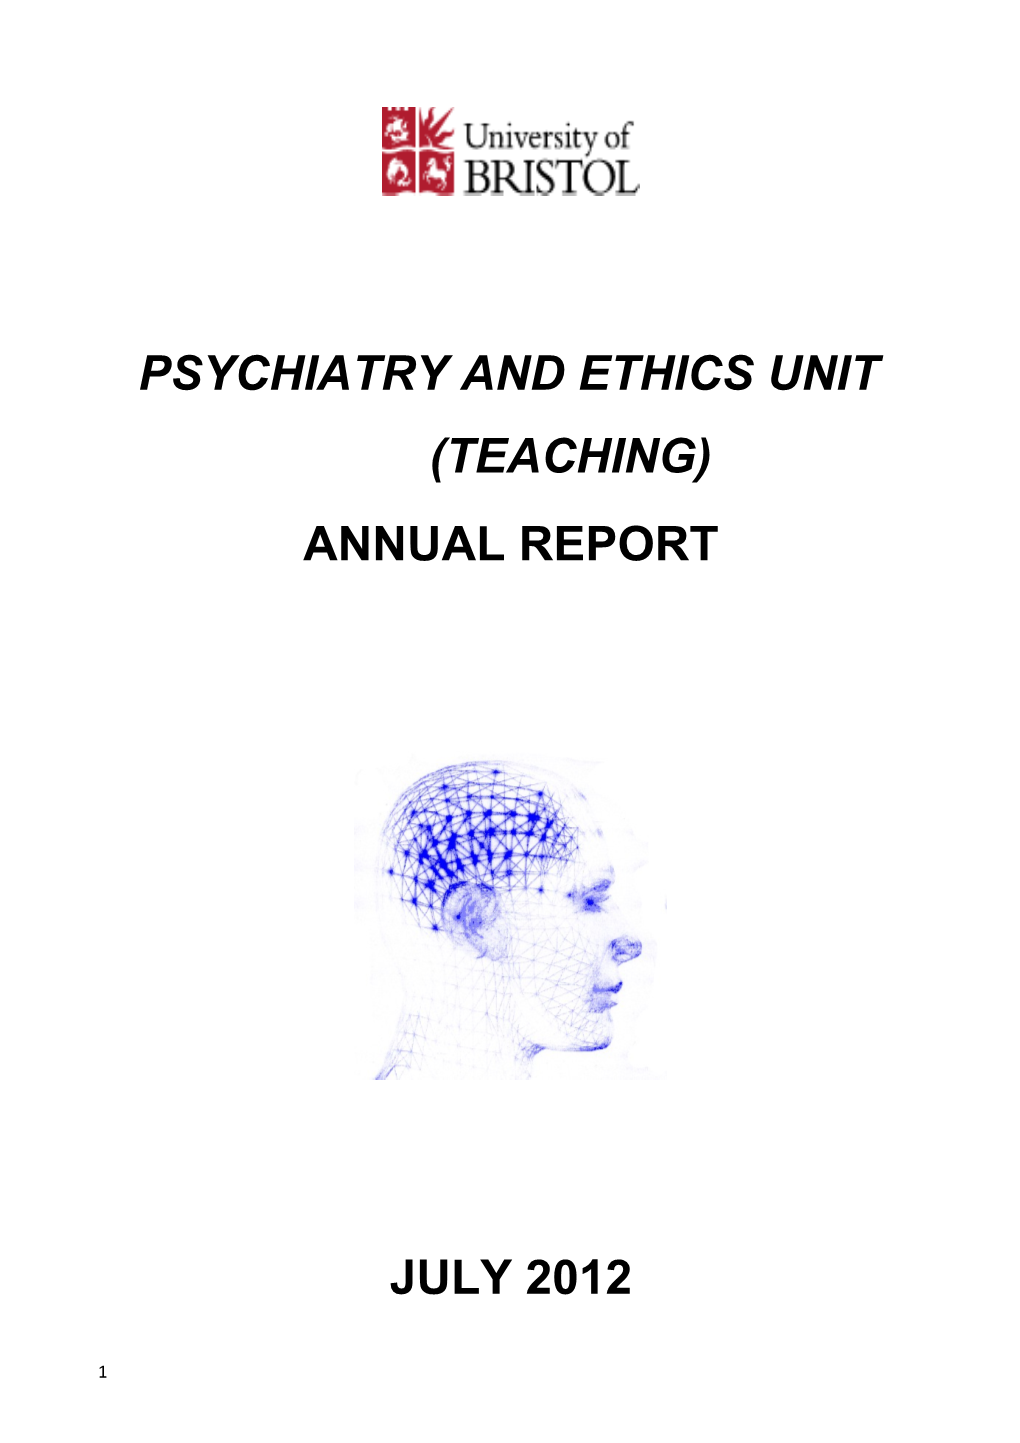 Psychiatry and Ethics Unit (Teaching)